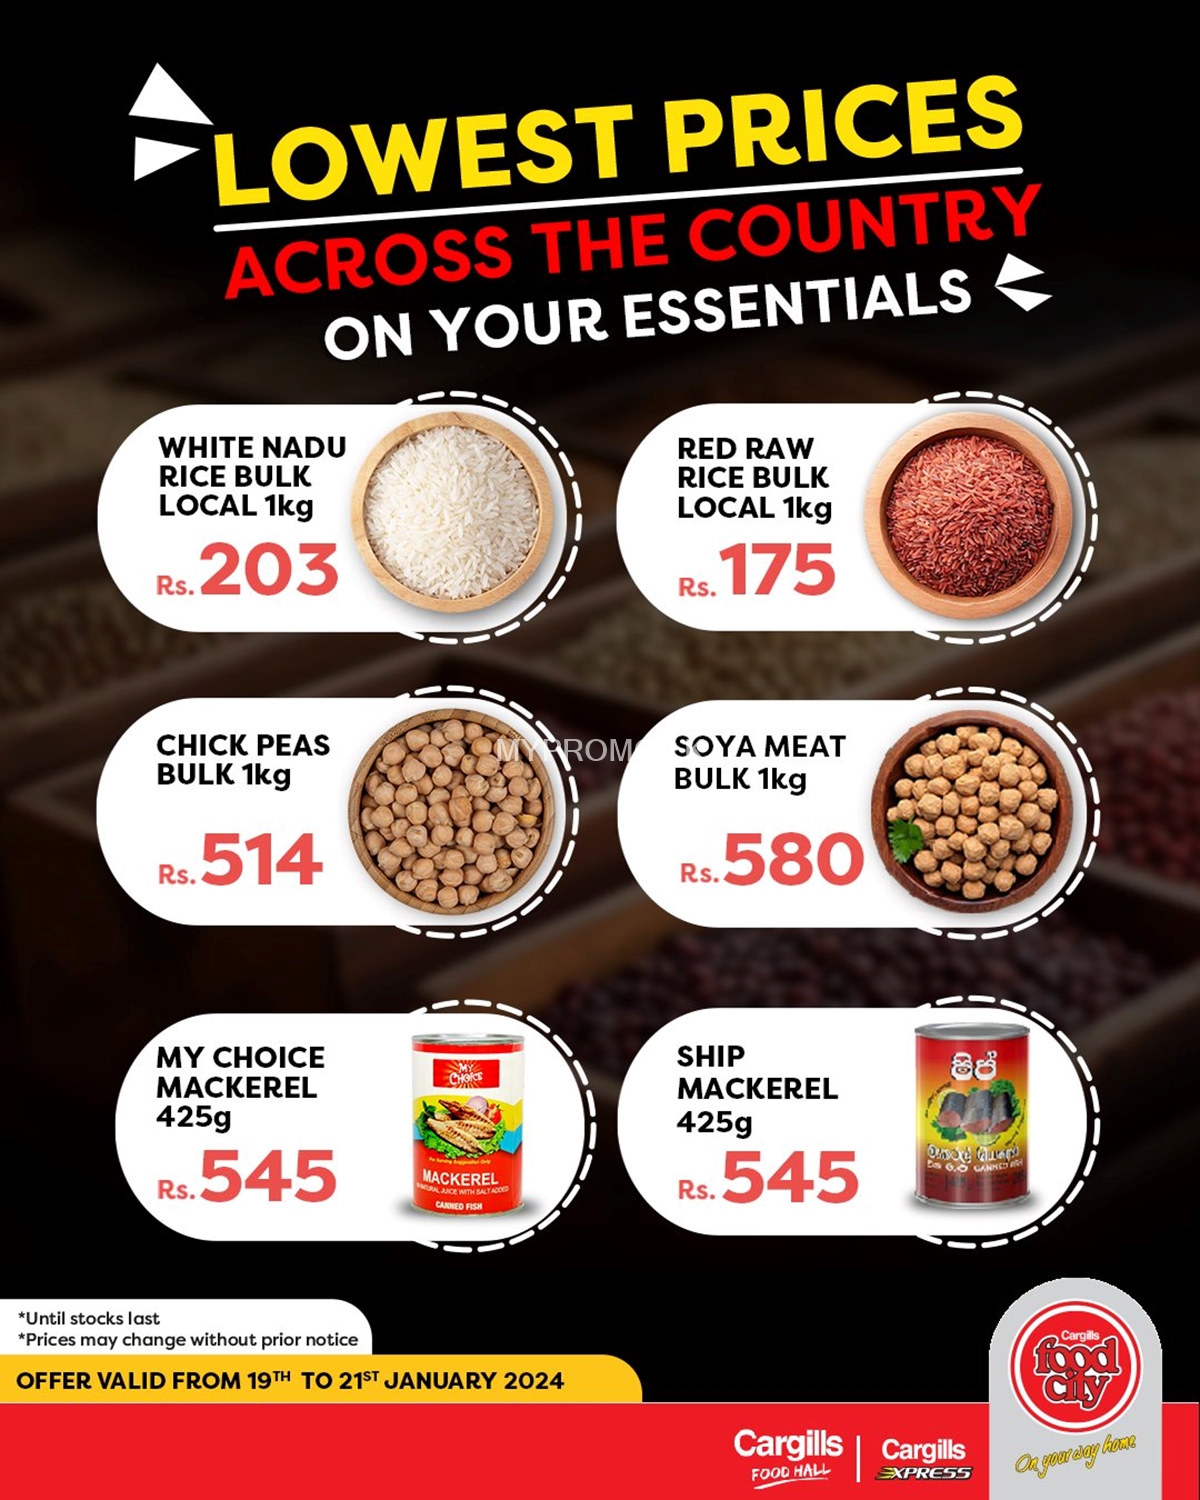 Lowest Prices on your essentials at Cargills Food City